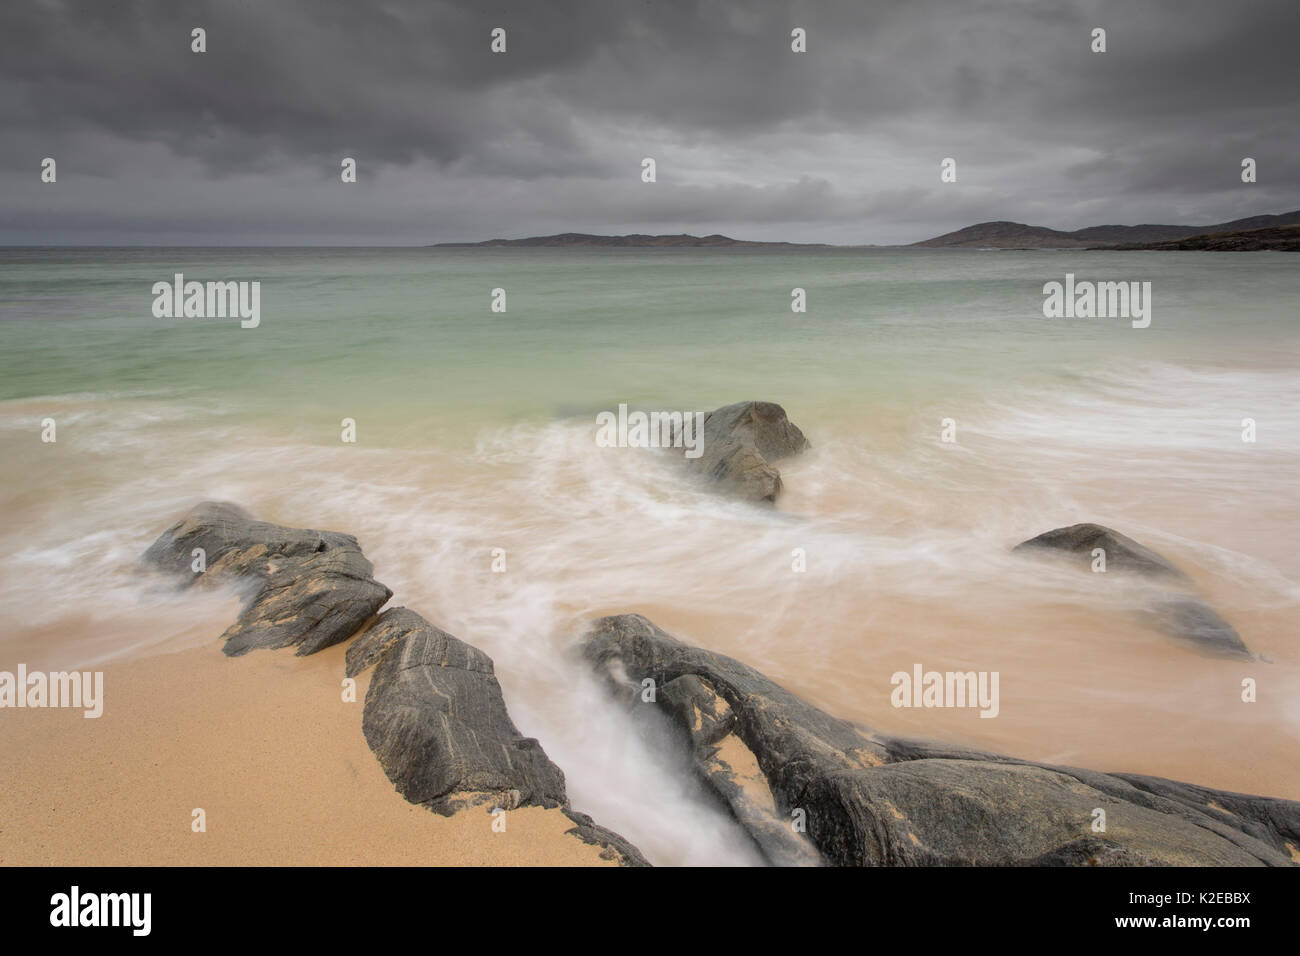 Rocks on Seilebost beach with storm approaching, North Harris, Outer Hebrides, Scotland, UK, April 2013. Stock Photo